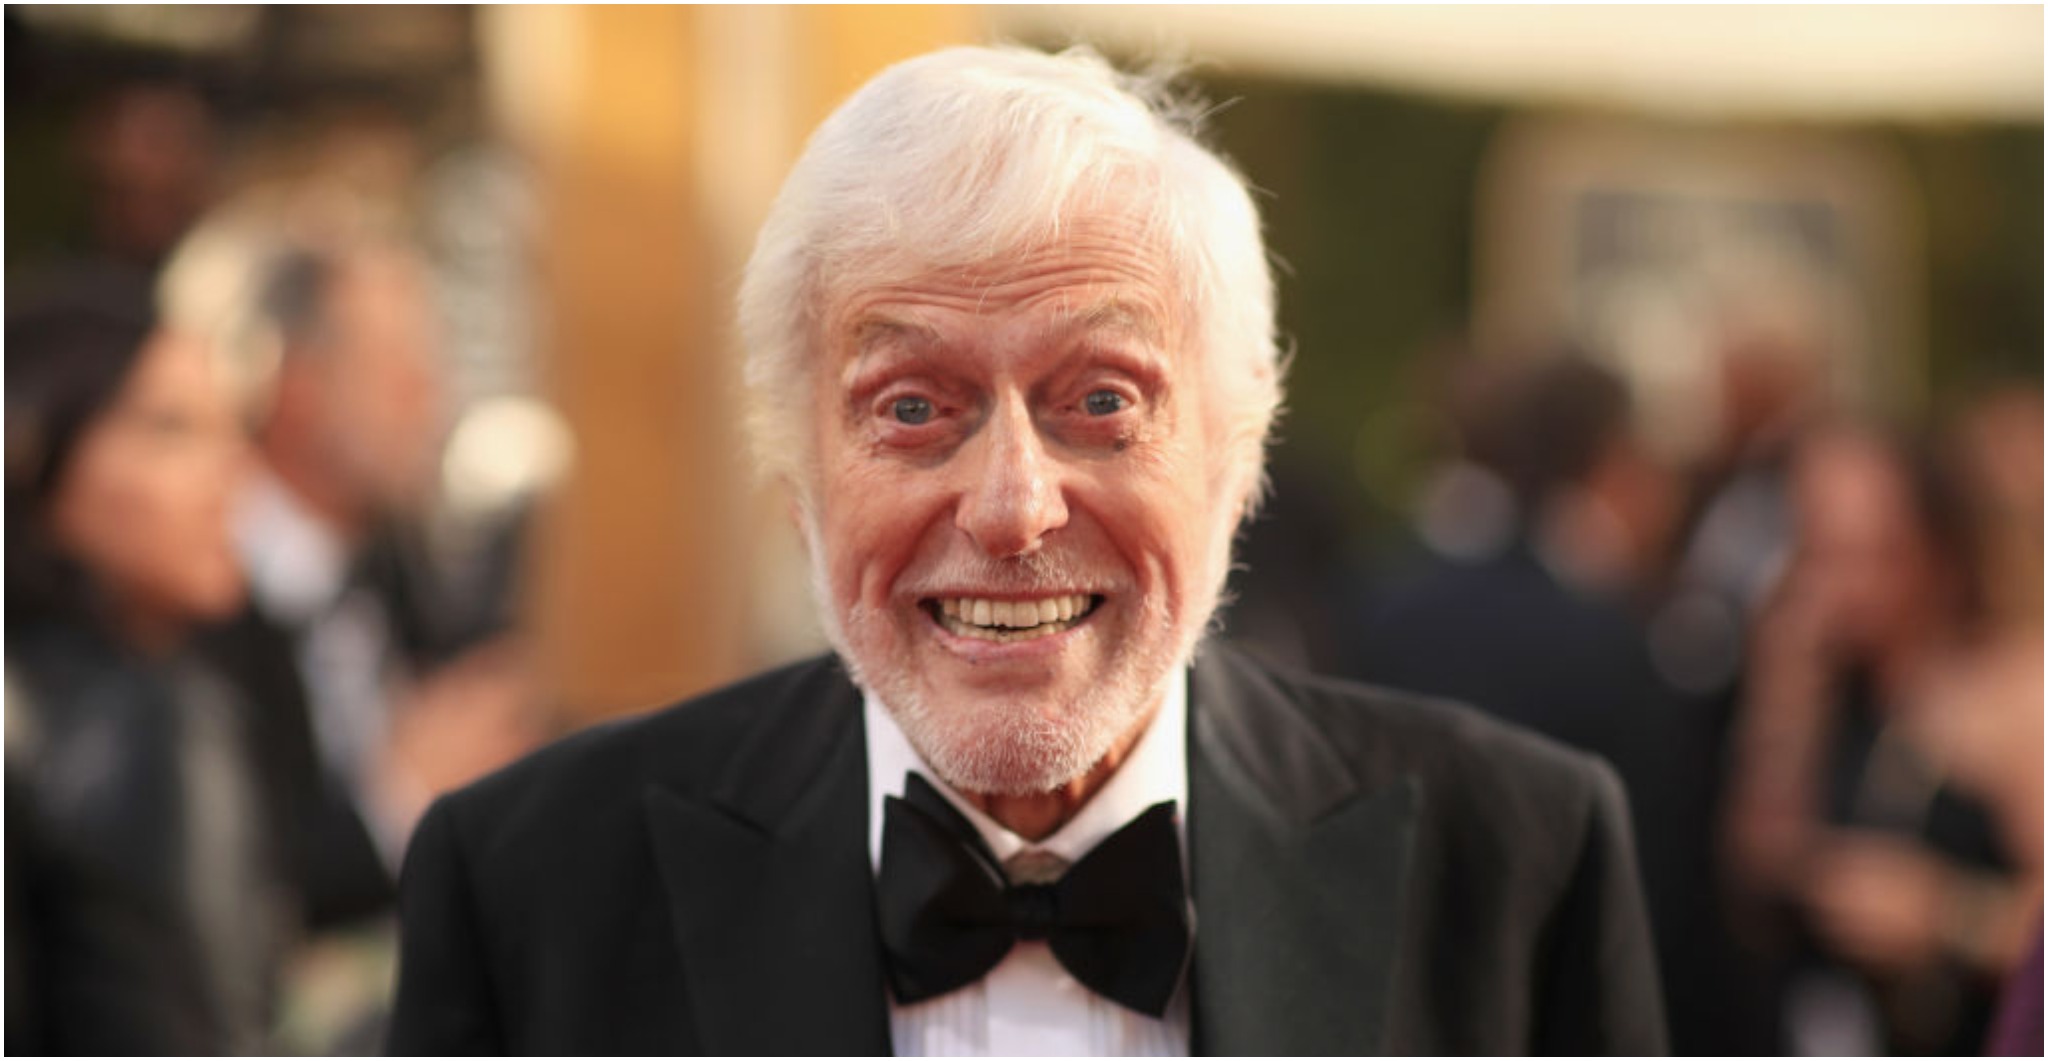 Dick Van Dyke arrives to the 76th Annual Golden Globe Awards held at the Beverly Hilton Hotel on January 6, 2019. -- (Photo by Christopher Polk/NBCU Photo Bank/NBCUniversal via Getty Images)